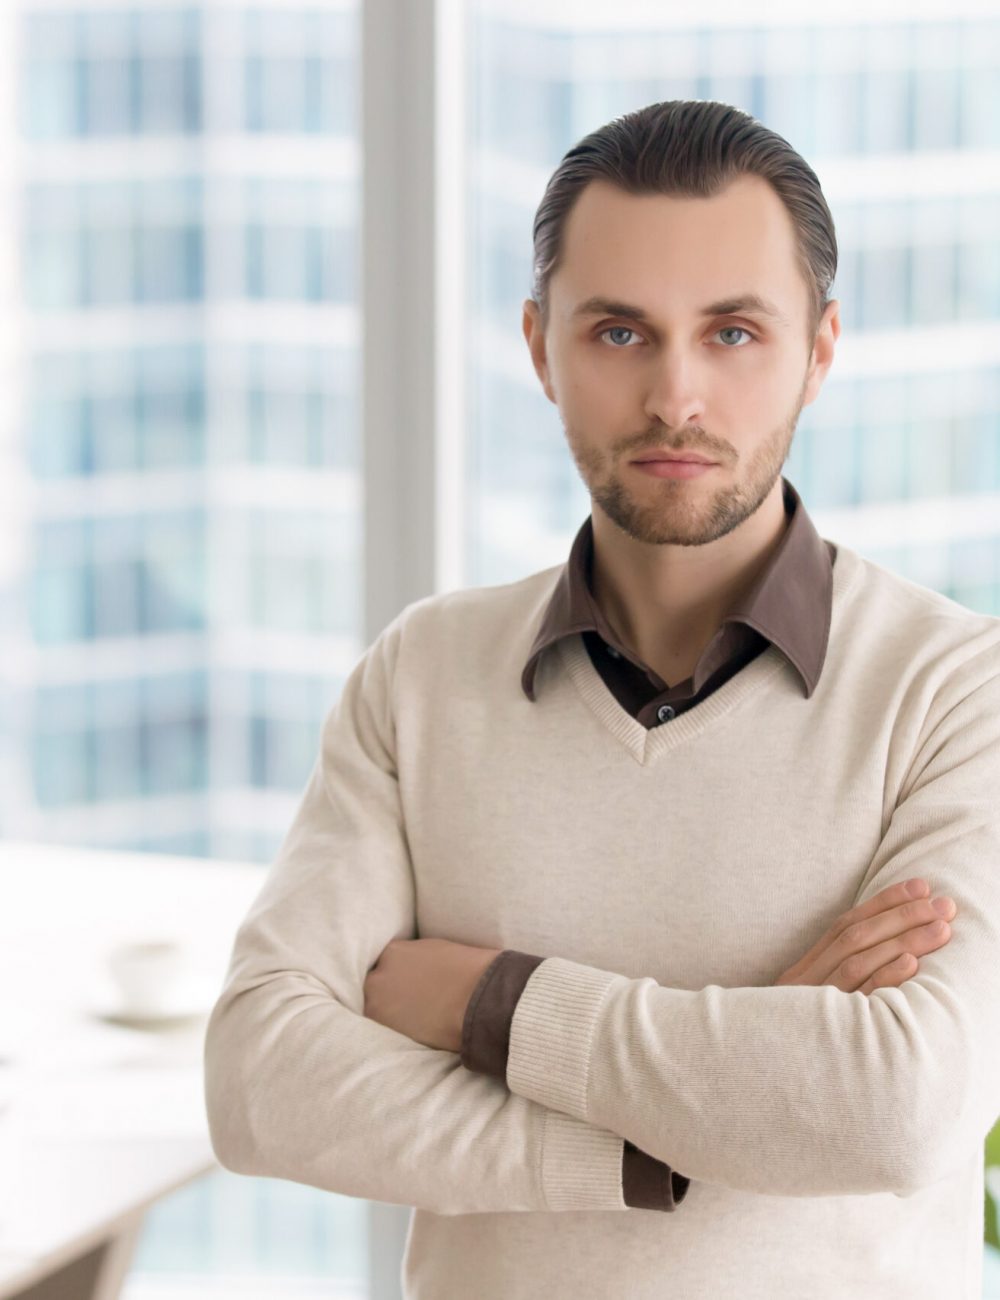 Portrait of young businessman standing in office with arms crossed. Ambitious successful entrepreneur, small business owner or company director posing looking at camera with serious facial expression